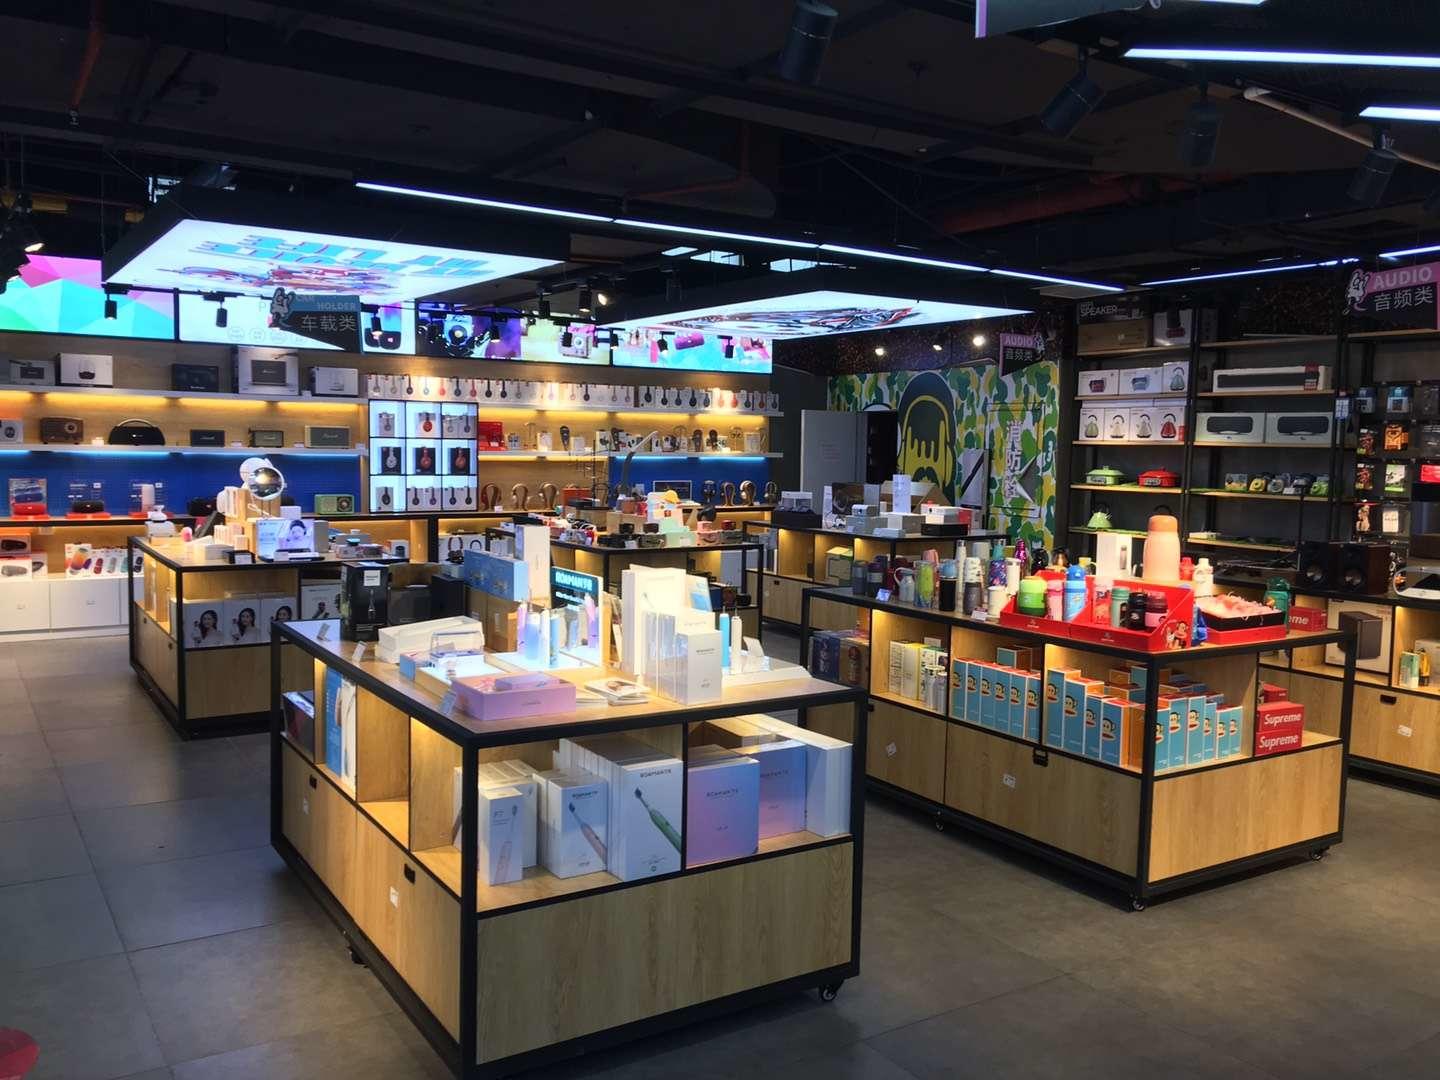 rechi retail store design and fitout